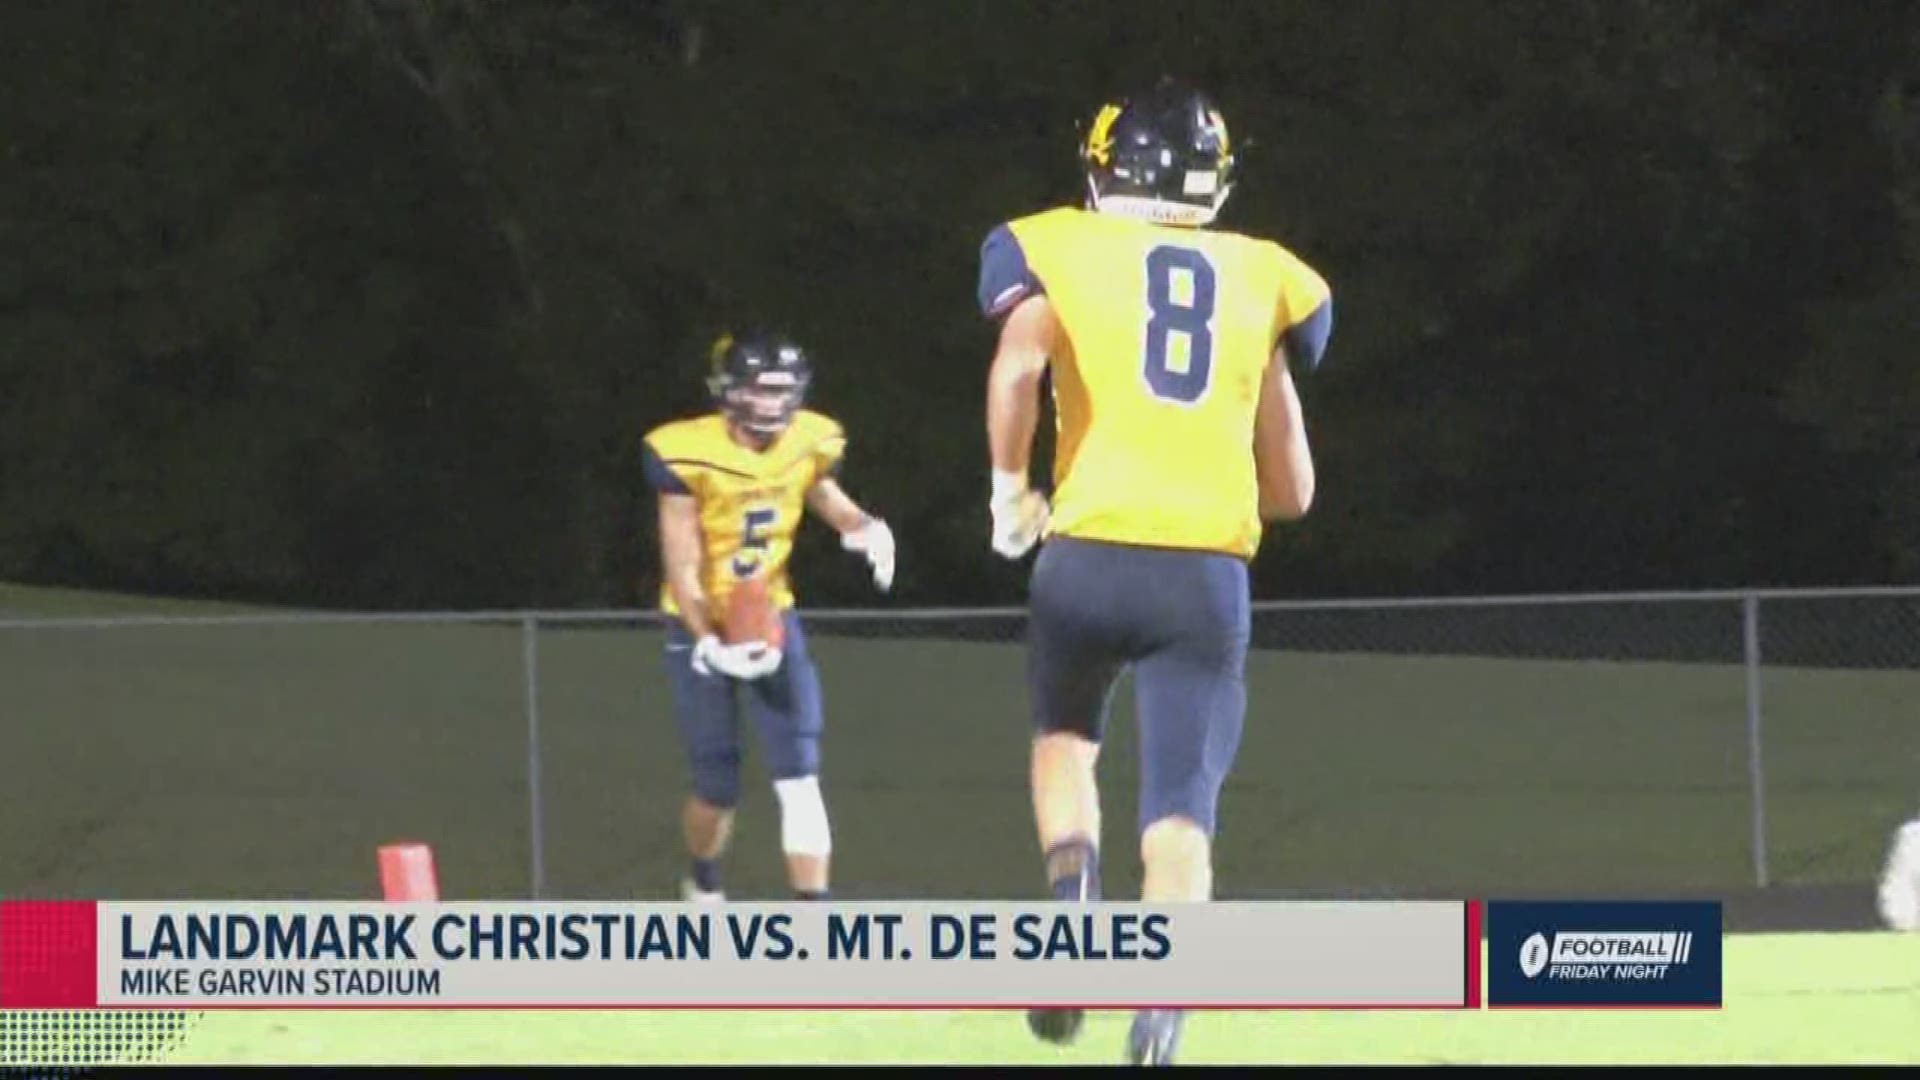 Here are your Football Friday Night highlights.